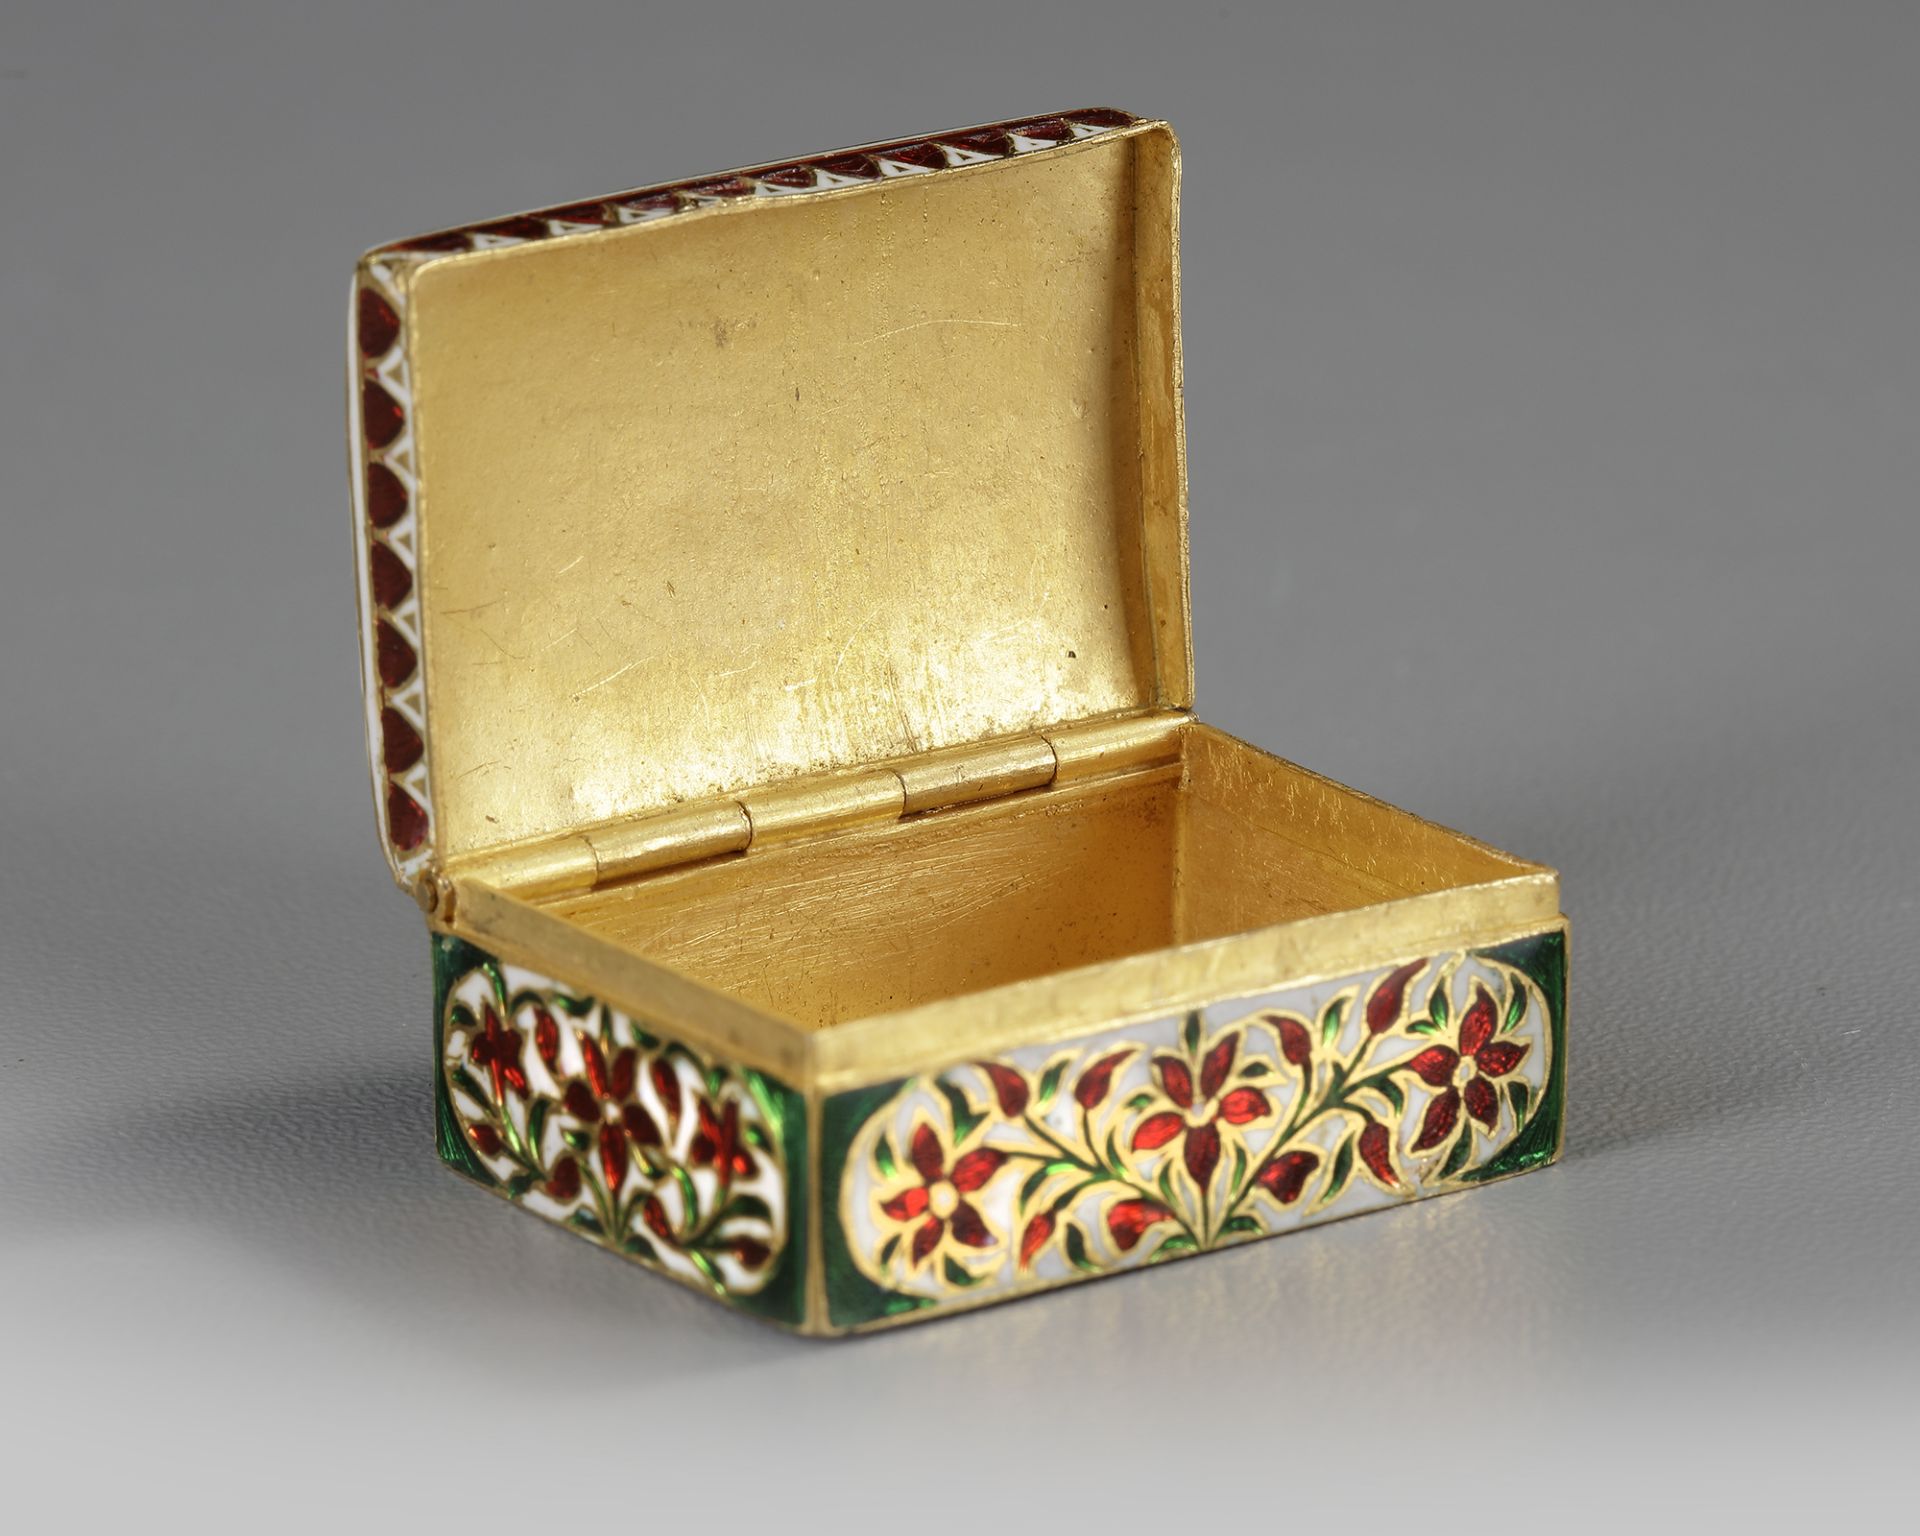 AN INDIAN, JAIPUR, RAJASTHAN ENAMEL, POLKI DIAMOND AND RUBY BOX, FIRST HALF OF THE 20TH CENTURY - Image 2 of 4